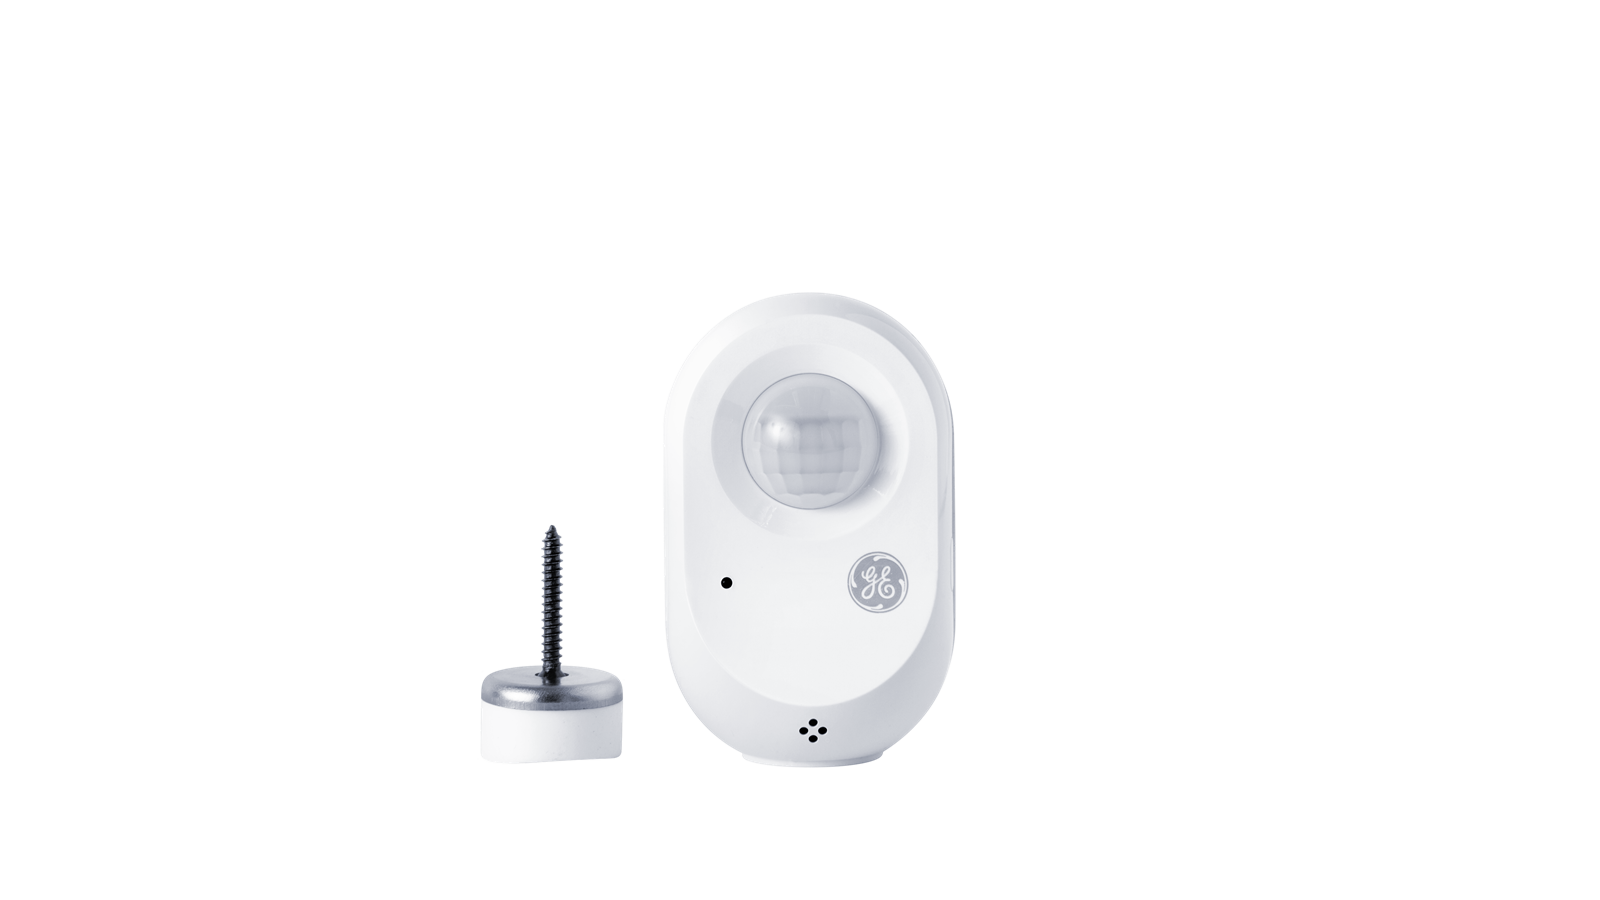 A wireless motion sensor and magnetic mount.